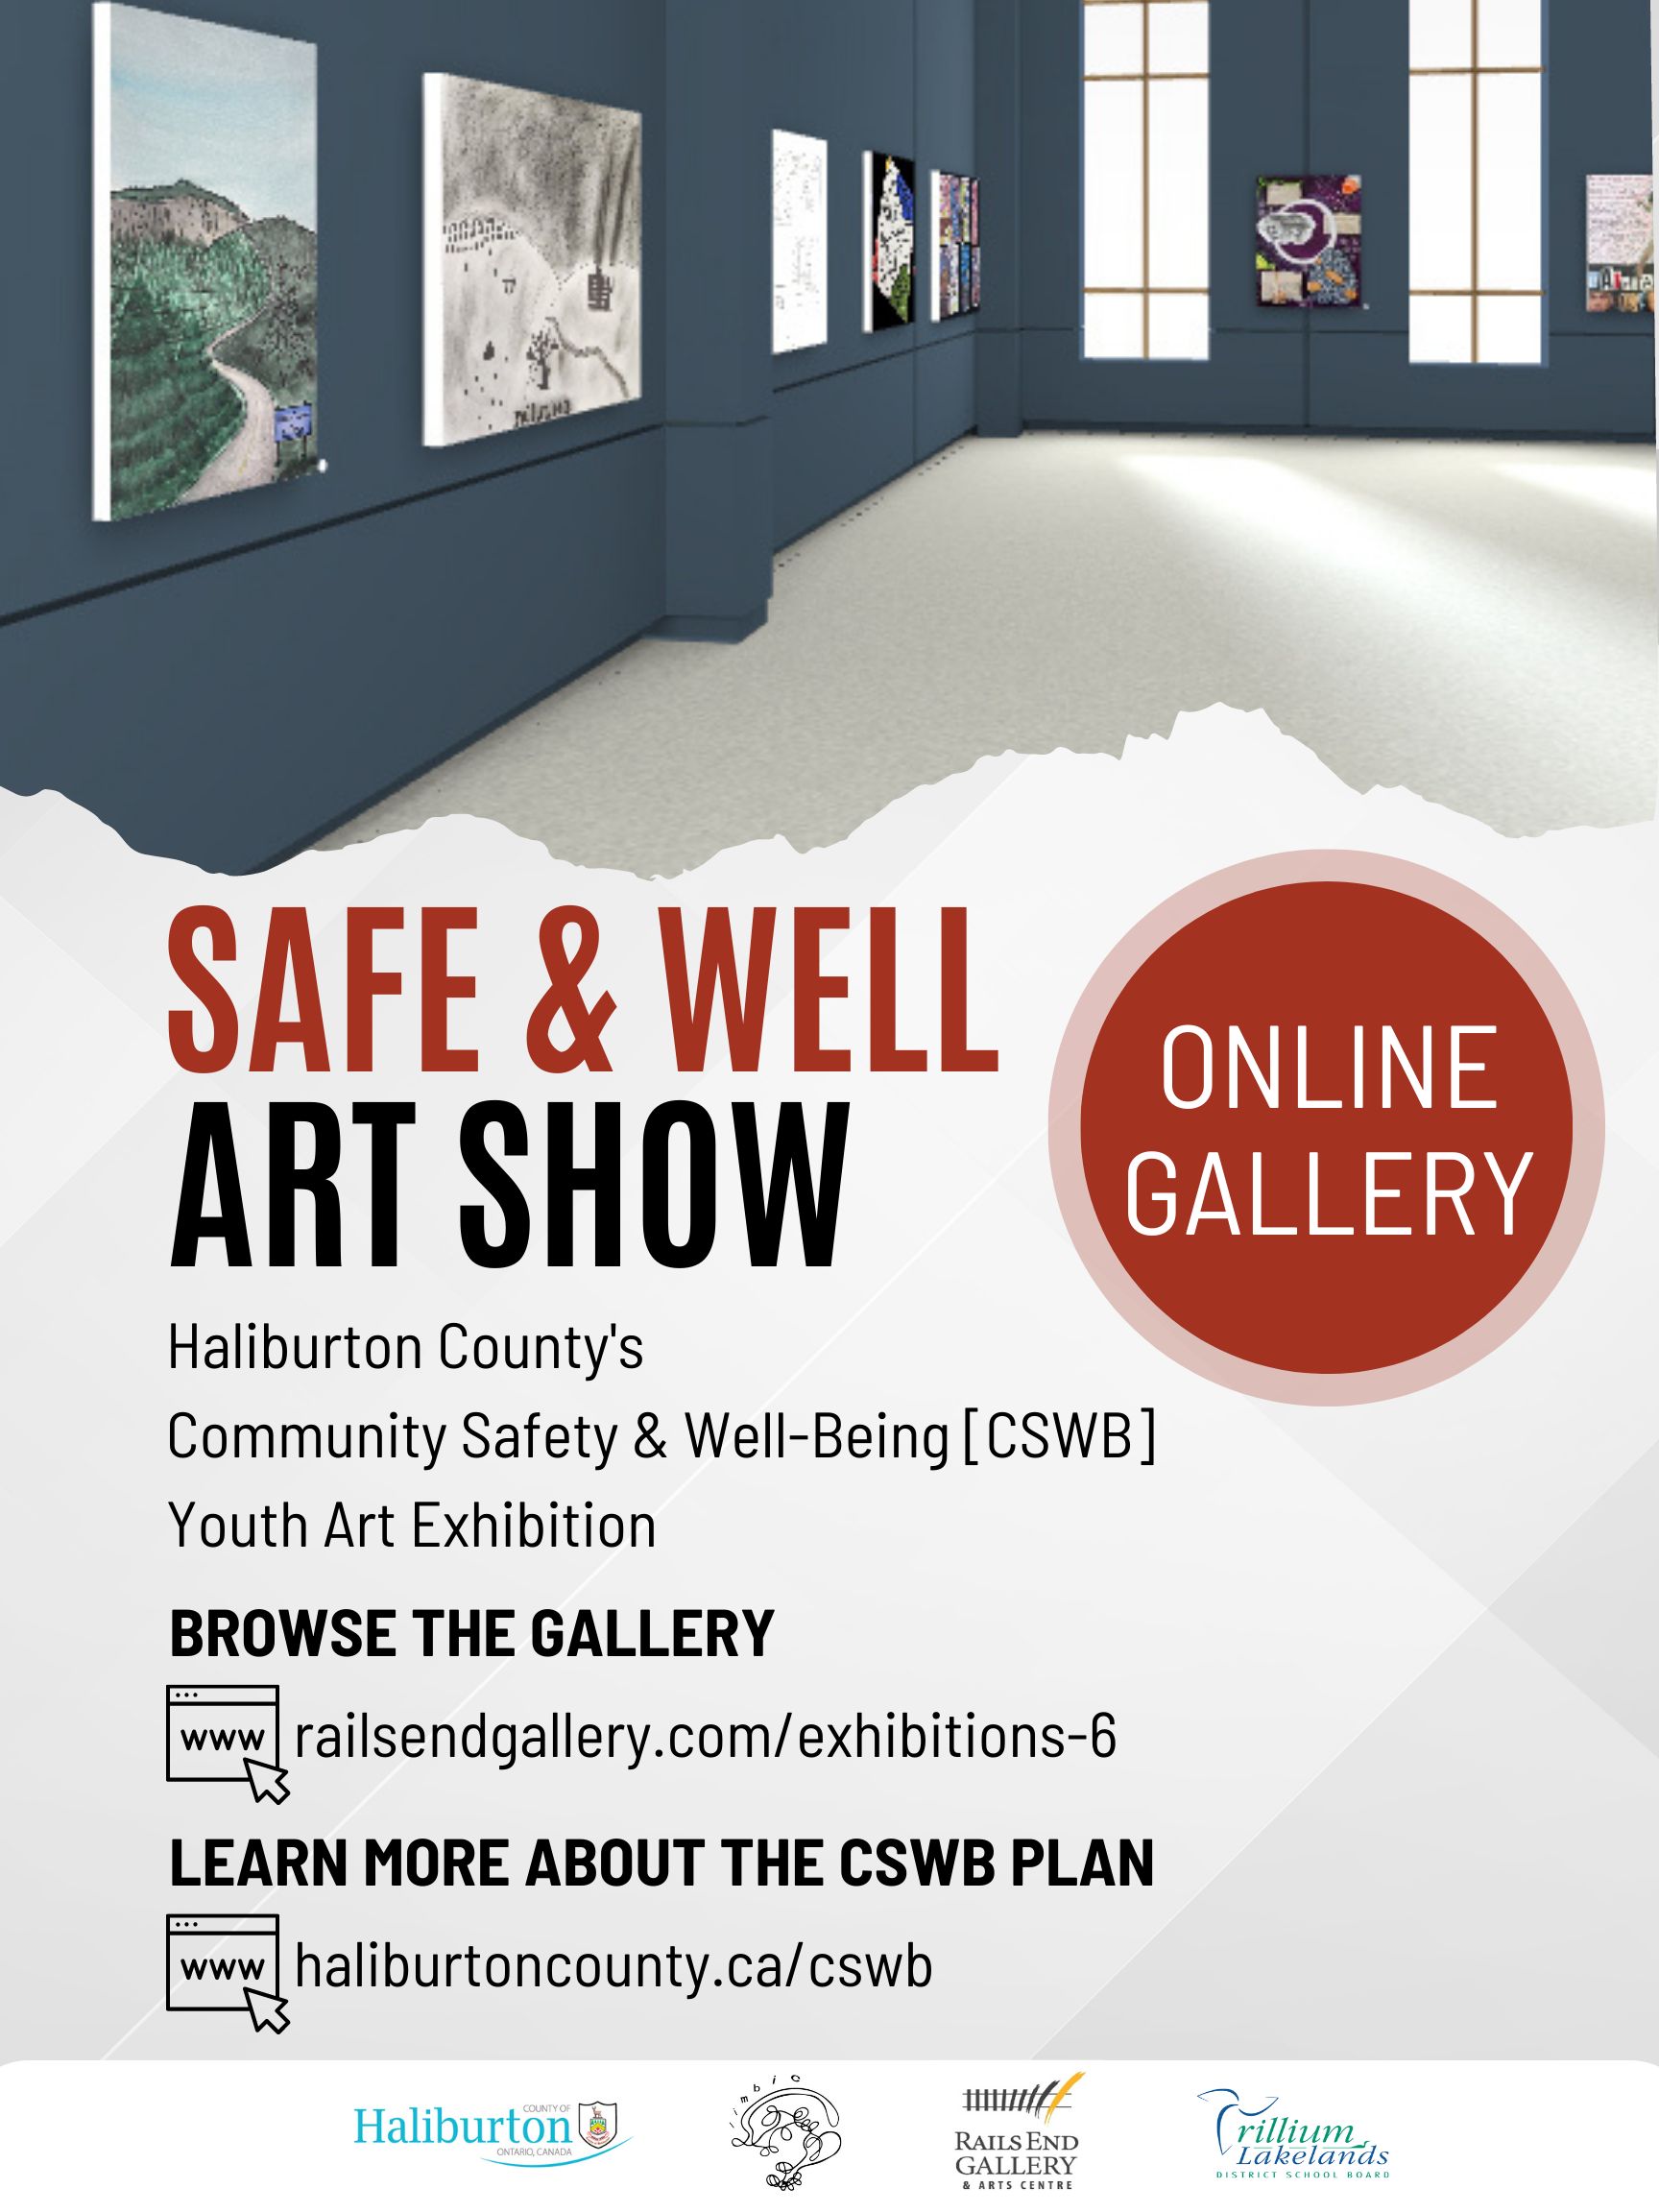 Haliburton County's CSWB Youth Art online show promotional poster noting the show is open, and the Rails End Gallery link (included below this image in text) to access it